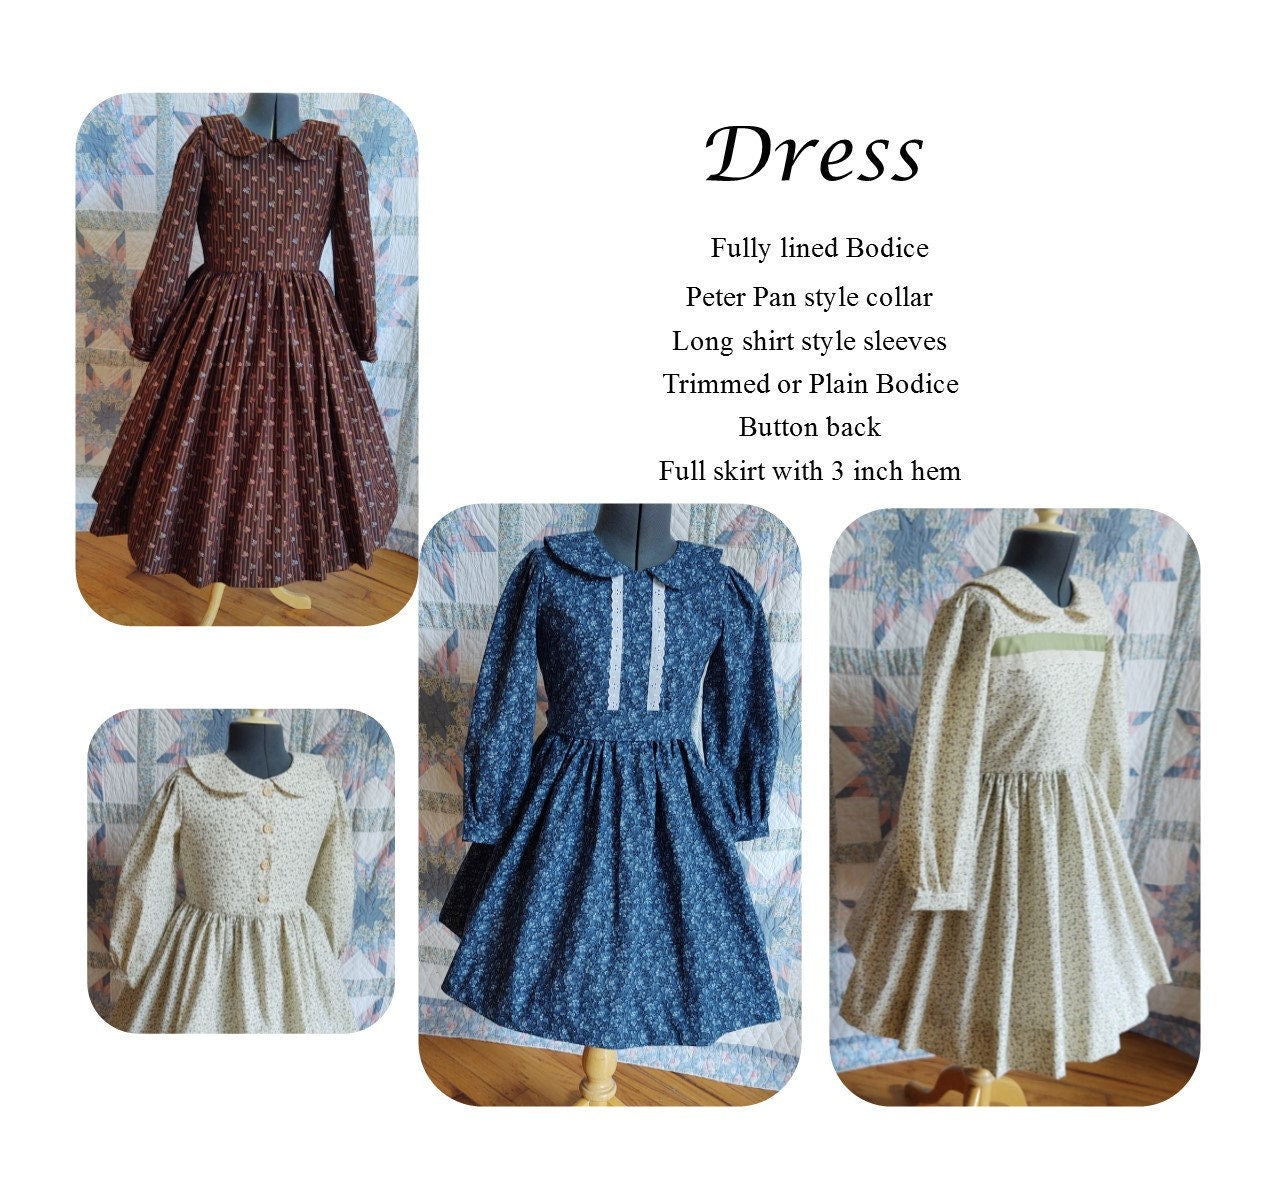 Girl's Dress, Pinafore and Bonnet Combination - MADE TO ORDER - Victorian, Civil War, Prairie School Days, Old-fashioned, Historical